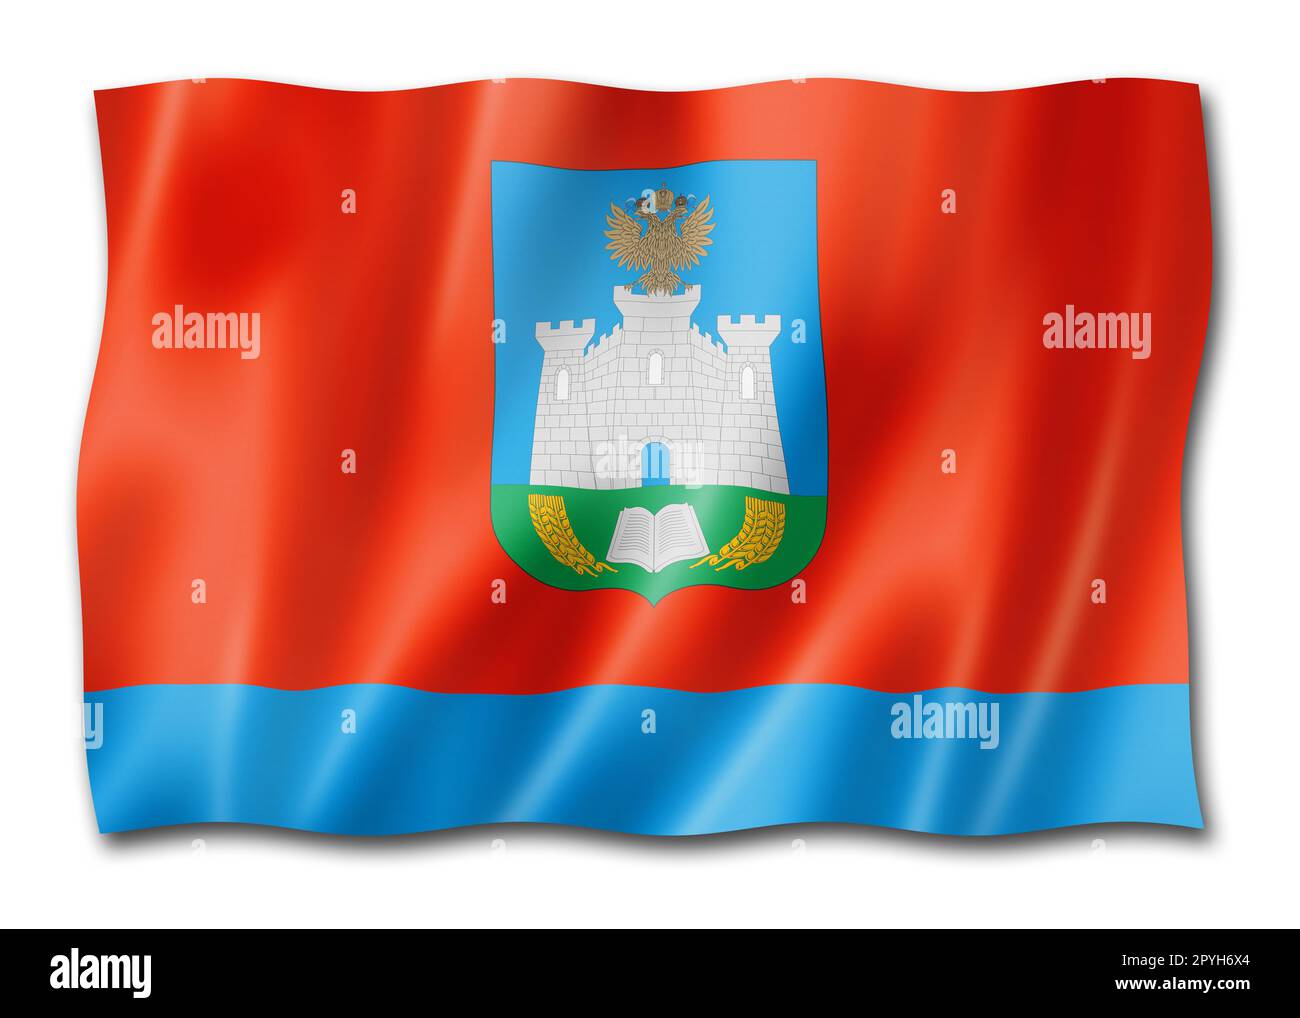 Oryol state - Oblast -  flag, Russia waving banner collection. 3D illustration Stock Photo